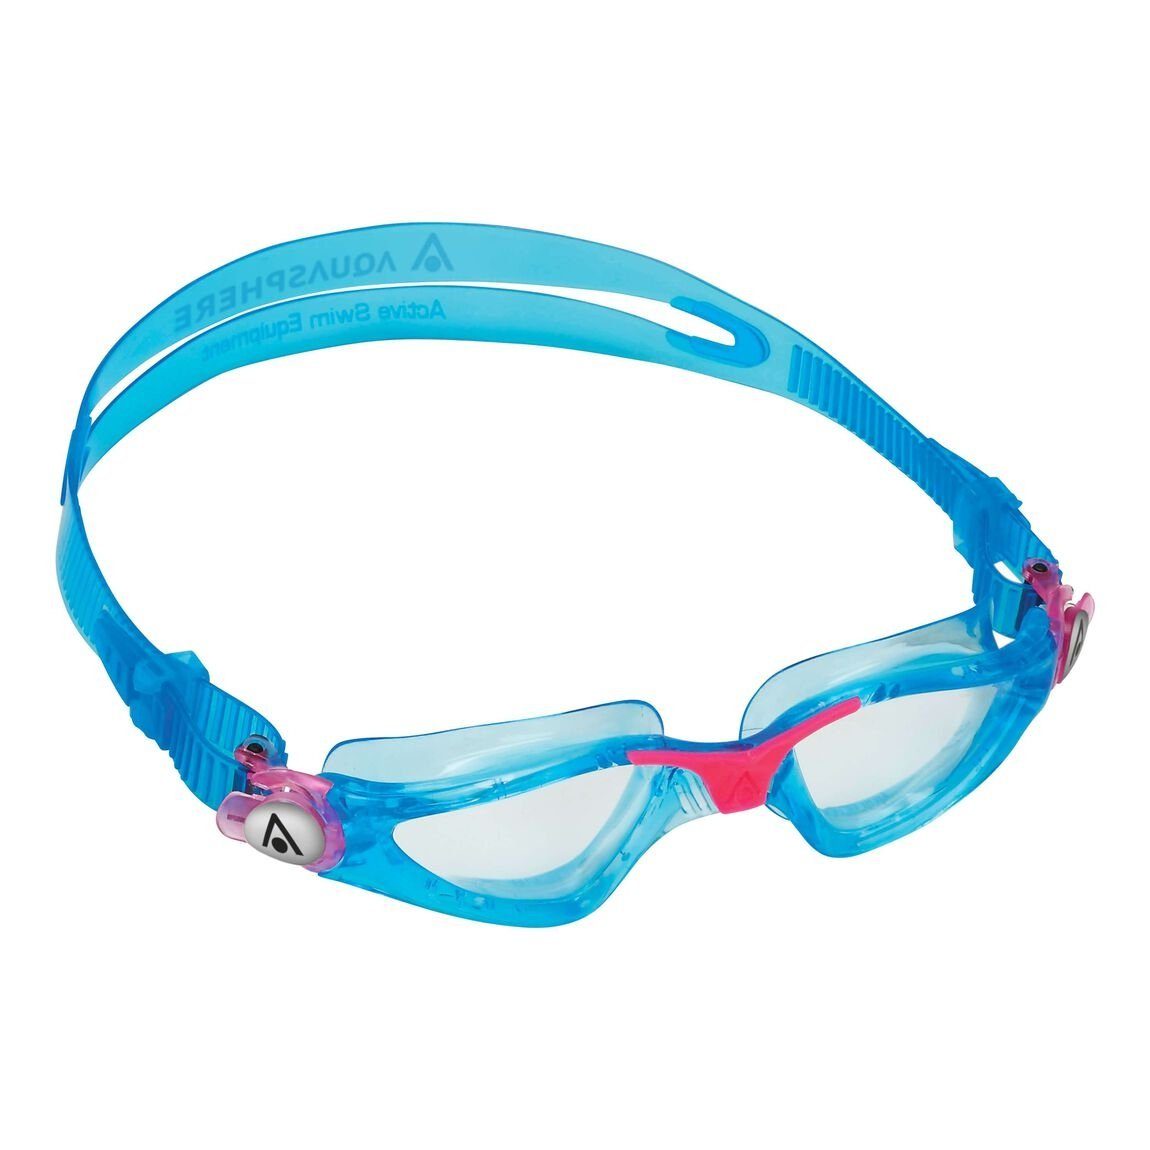 Aqua Sphere Schwimmbrille Aquasphere Kayenne 4302LC CLE PINK Kinder Schwimmbrille LENS TURQUOISE